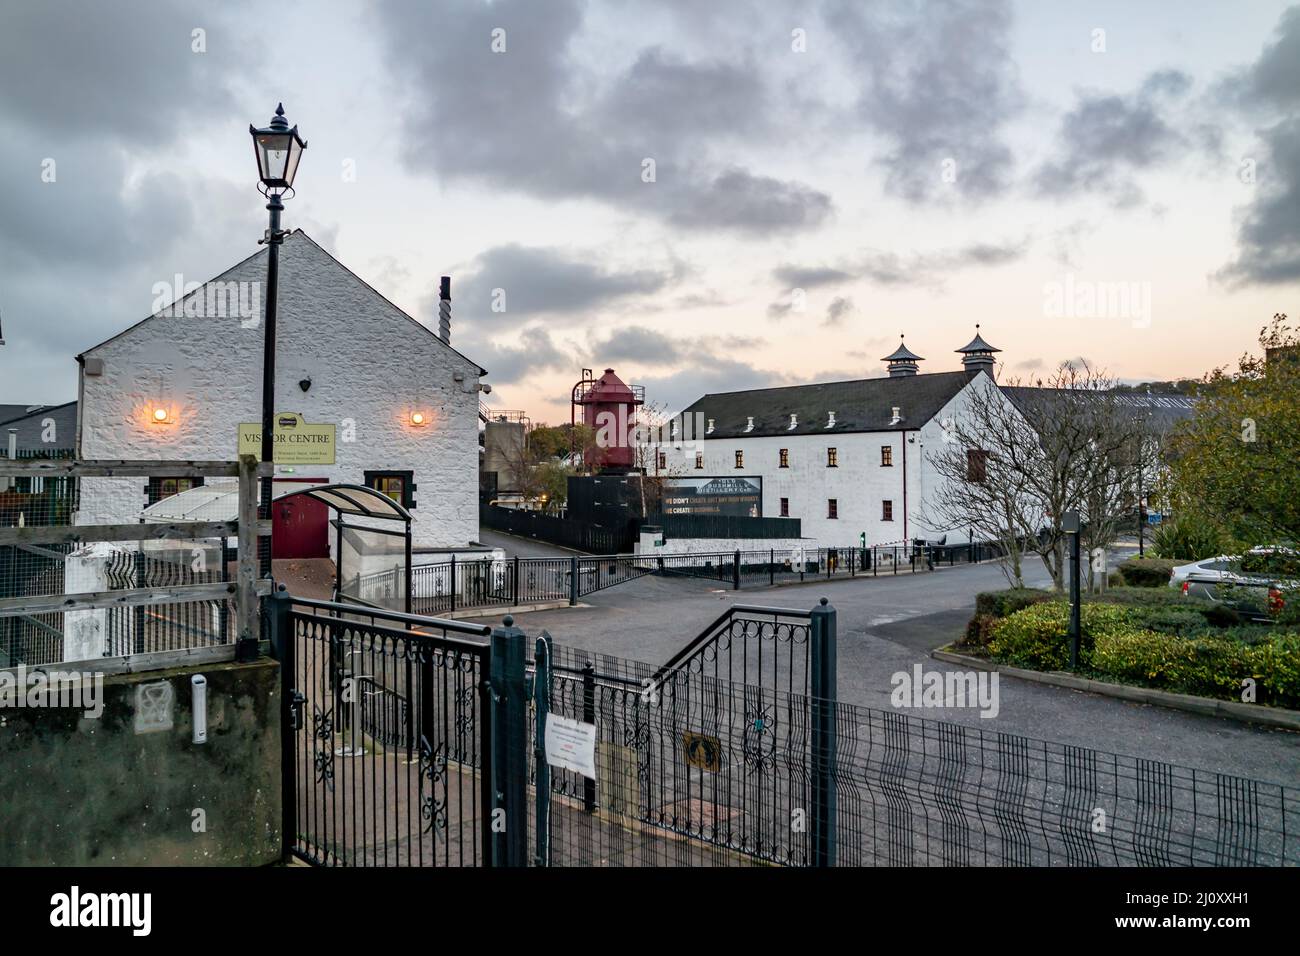 BUSHMILLS, NORTHERN IRELAND - NOVEMBER 24 2021 : The Bushmills distillery is producing but closed during the Covid 19 pandemic. Stock Photo